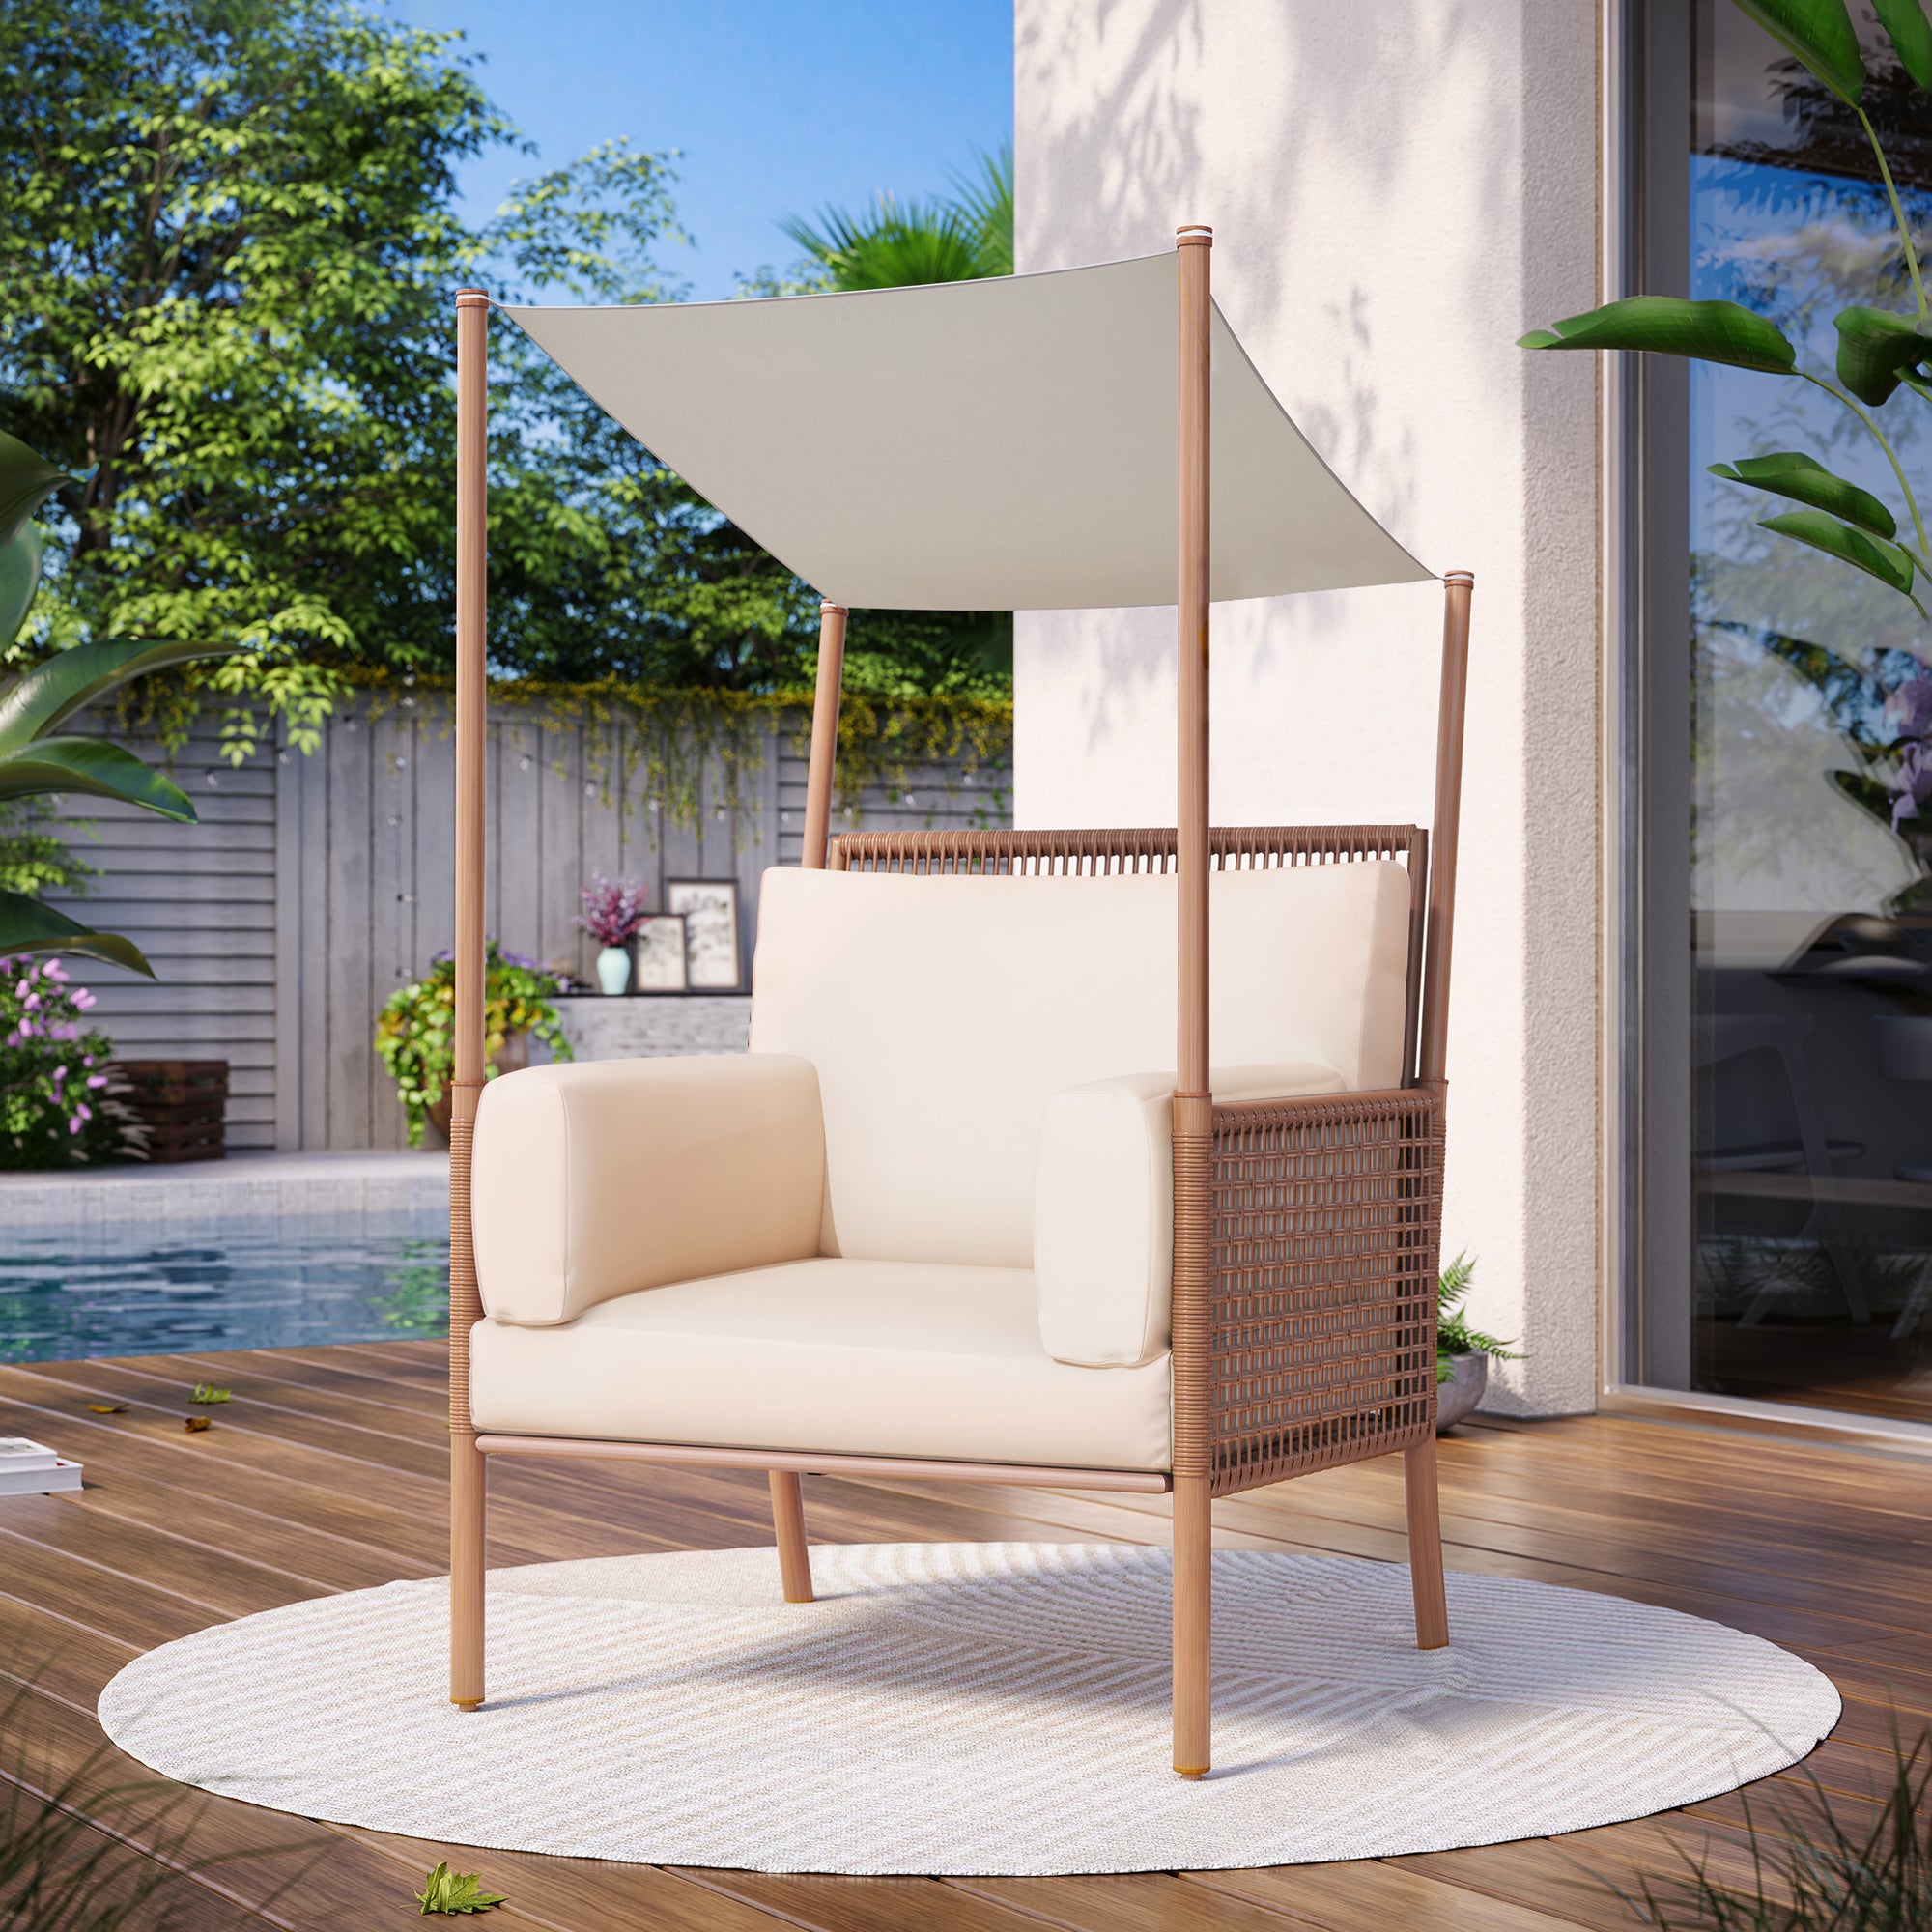 LAUSAINT HOME Oversized Canopy Patio Chair